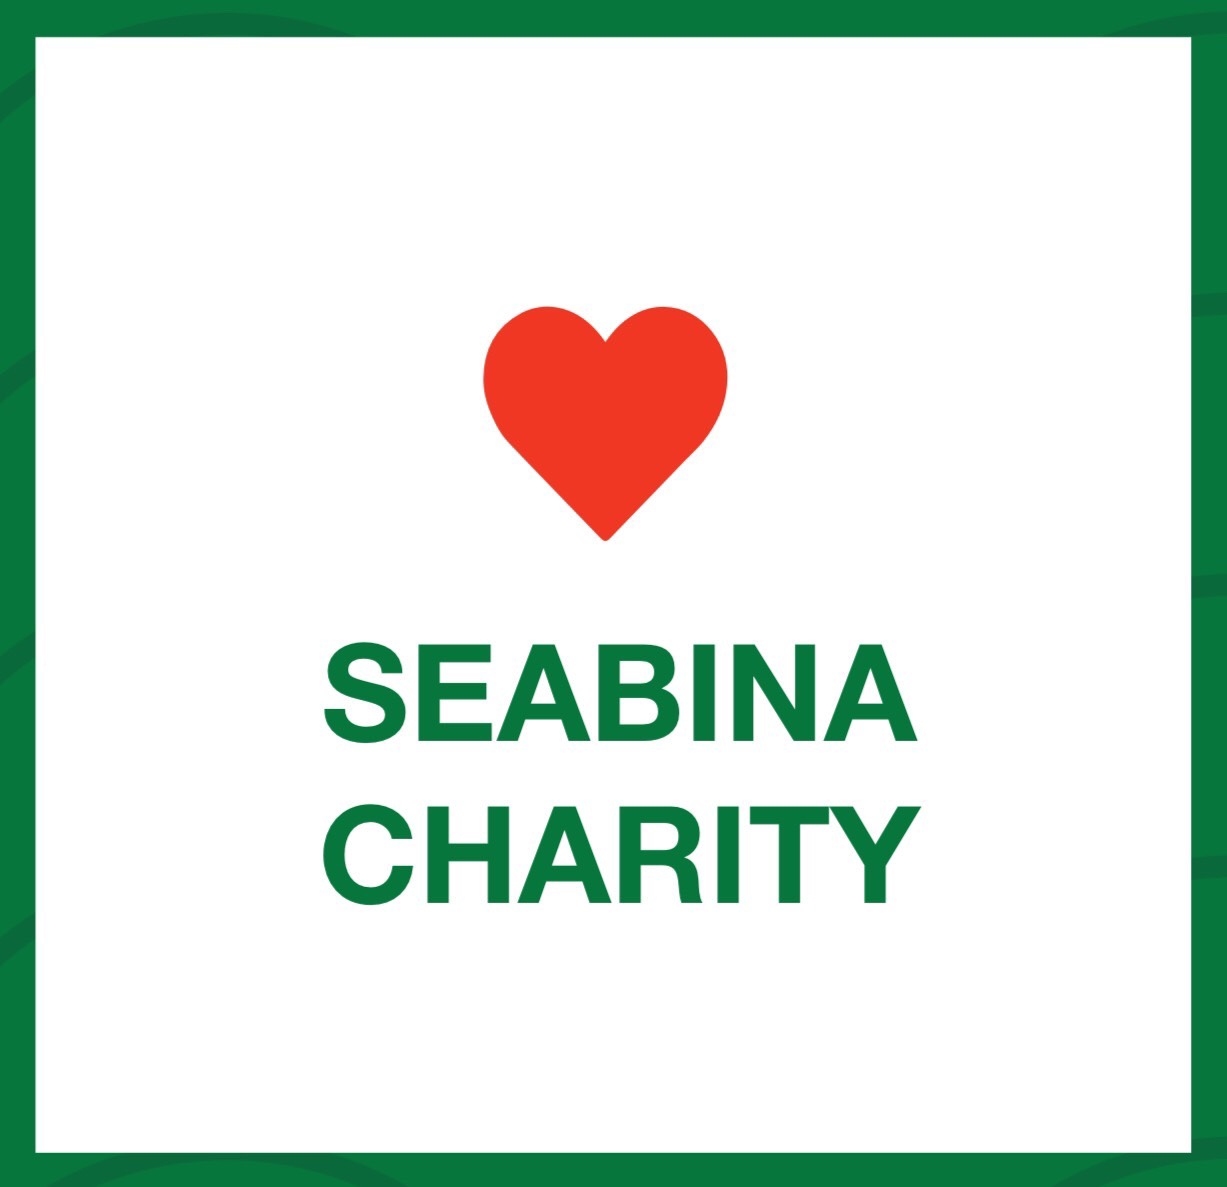 SEABINAGROUP CONTRIBUTES TO LOCAL COMMUNITY